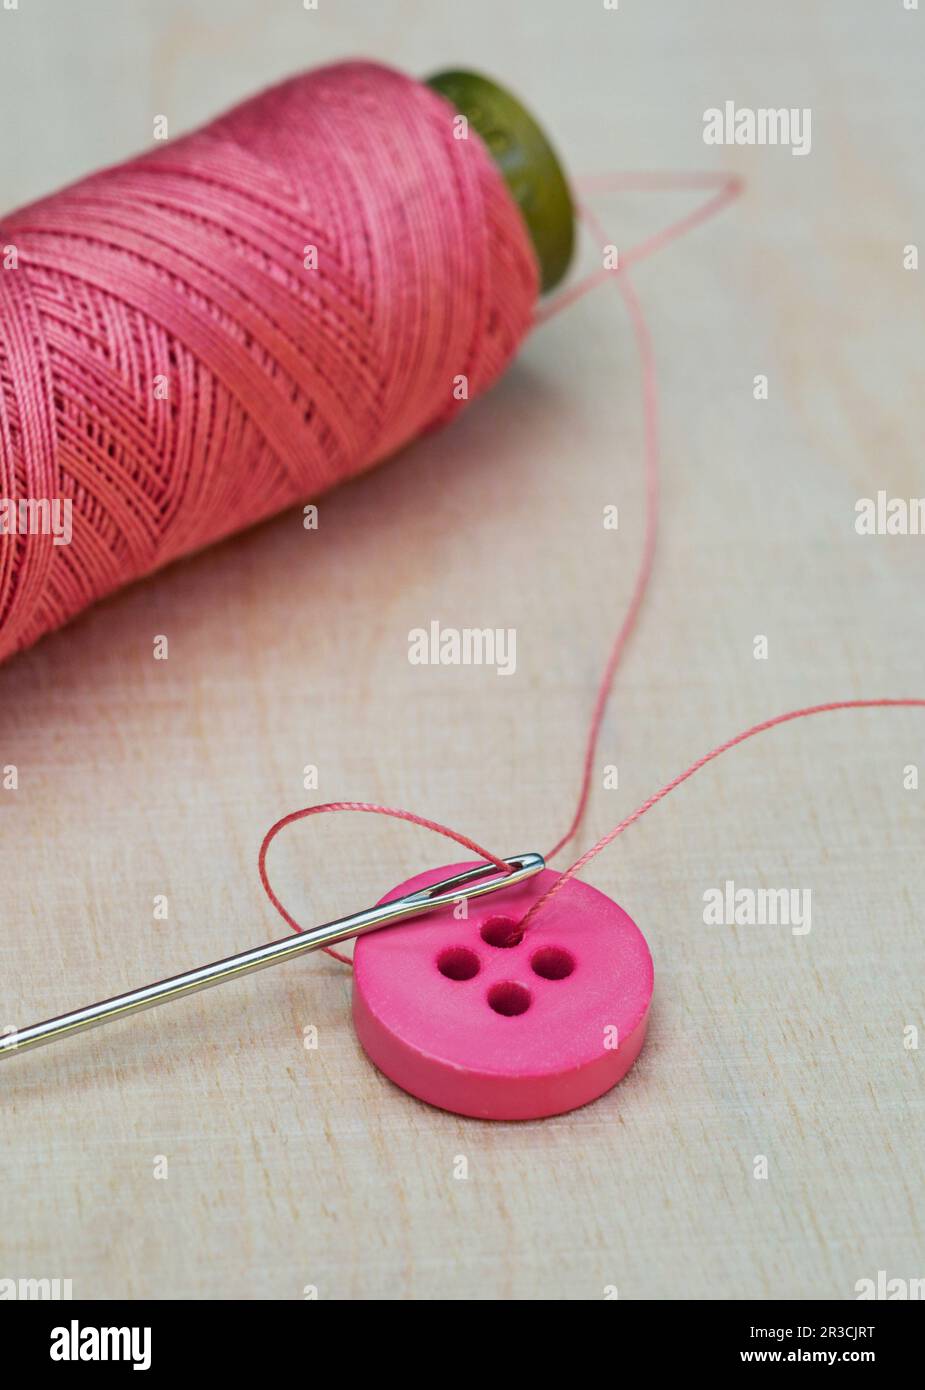 spool of thread, needle and button Stock Photo